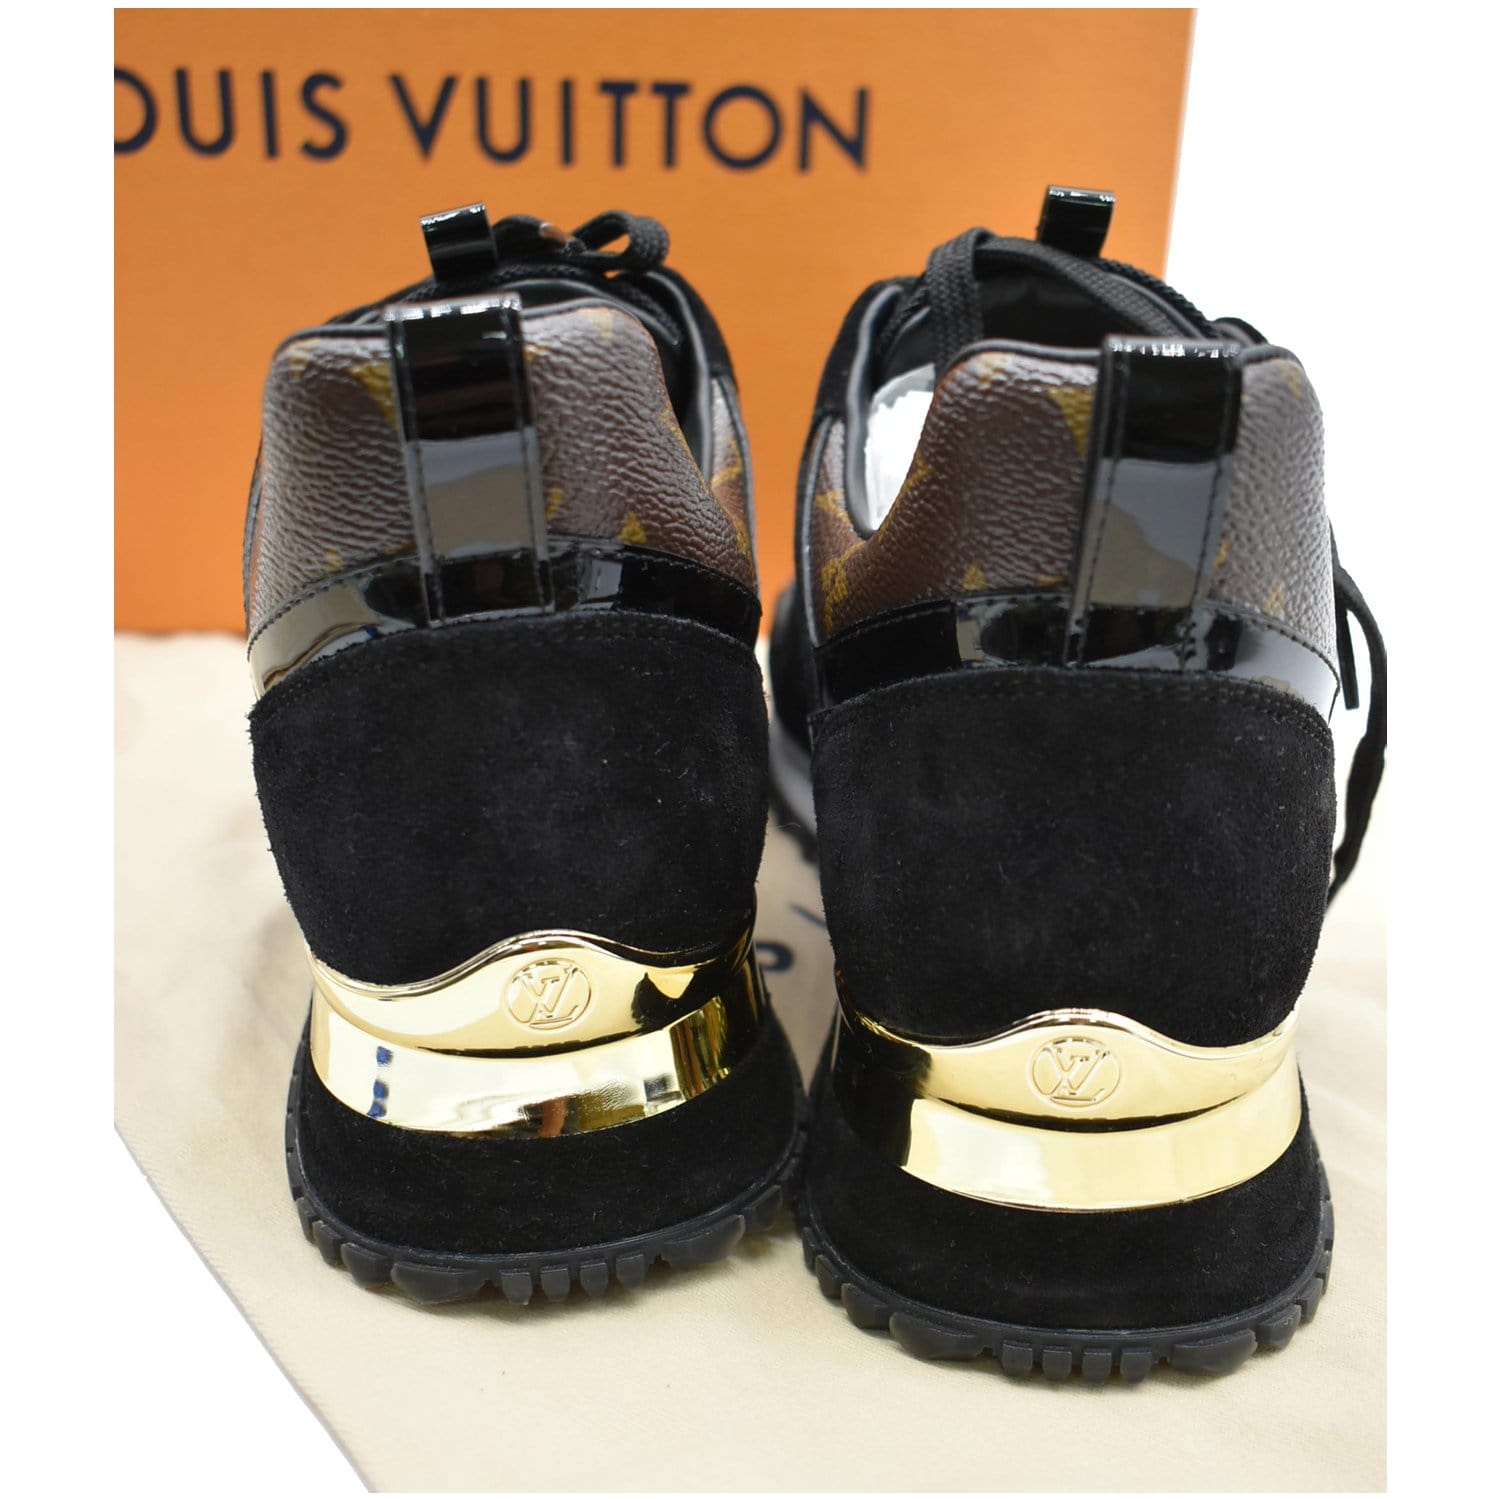 Louis Vuitton, Shoes, Authentic Louis Vuitton Runaway Leather Sneakers